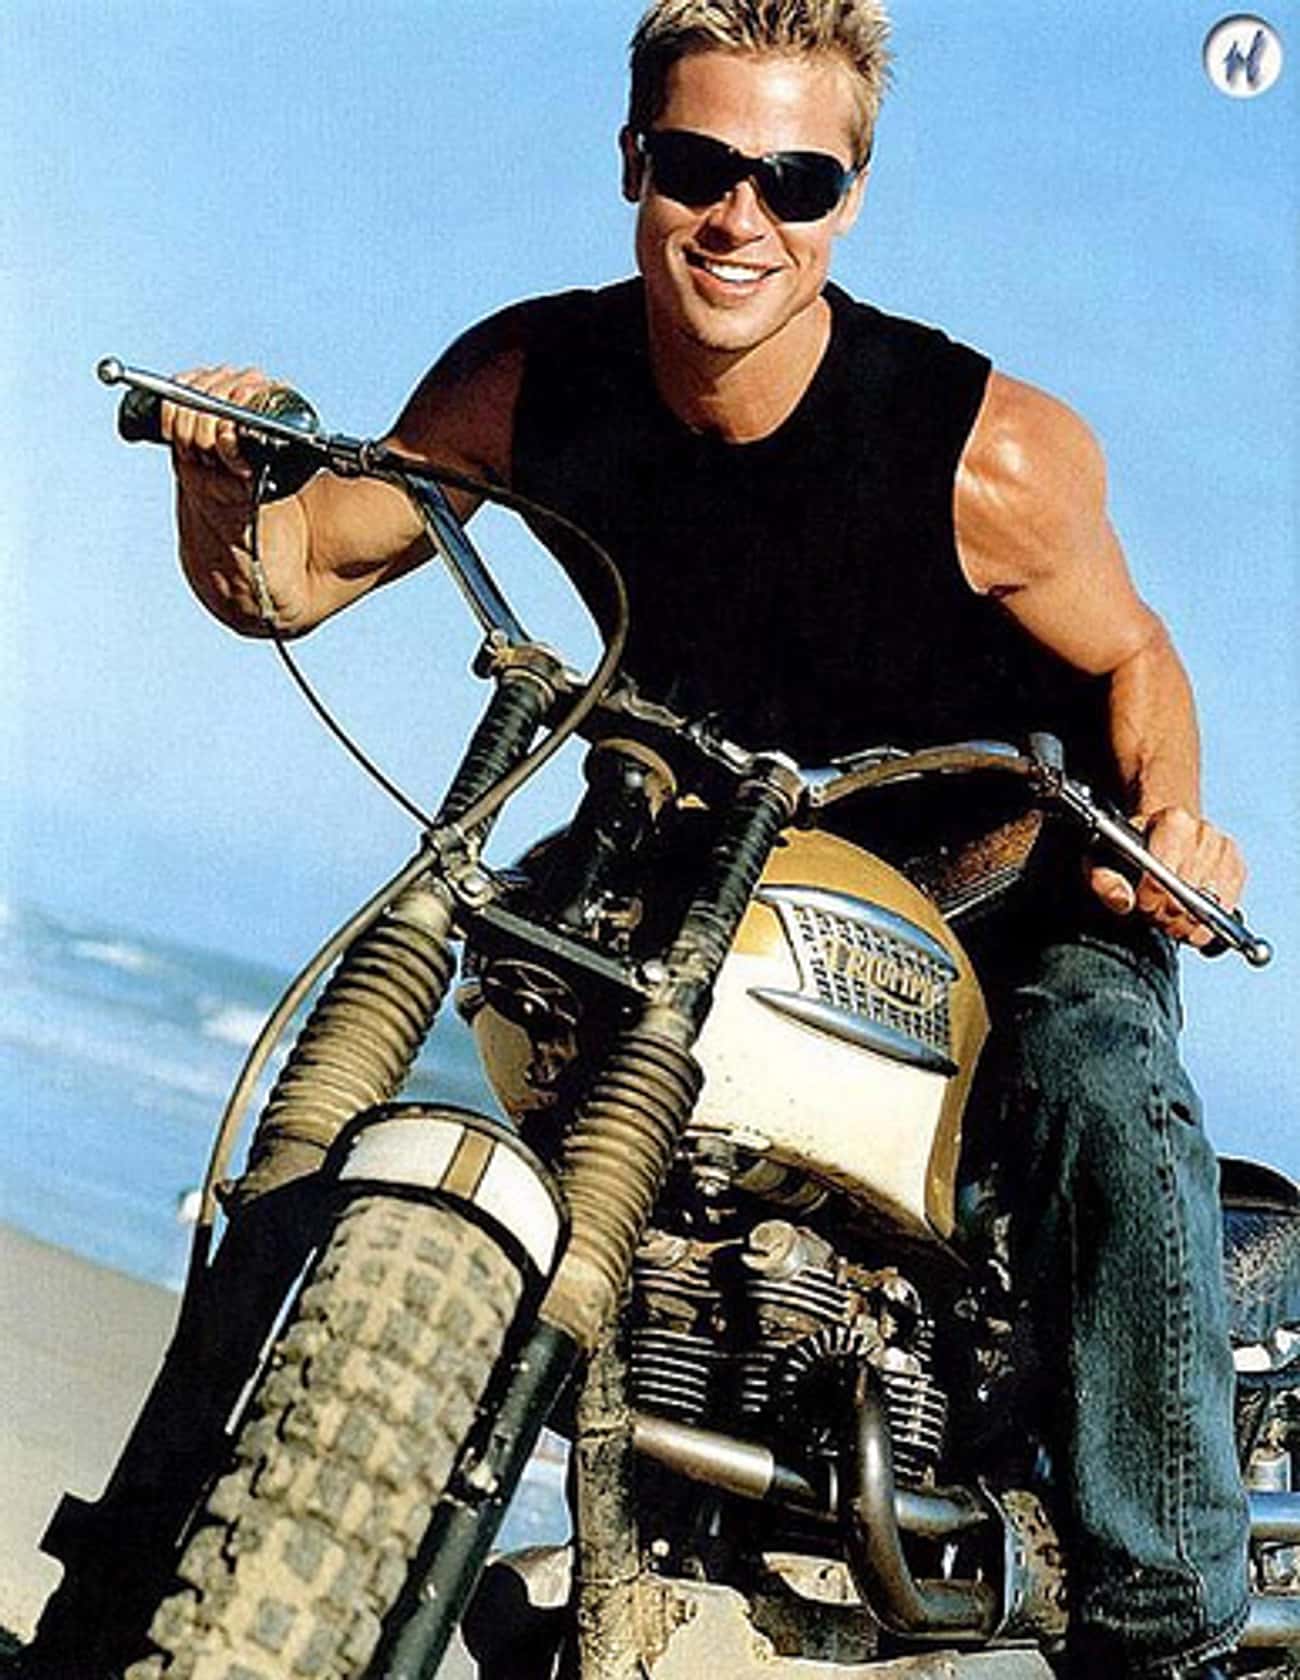 Brad Pitt Proves He Can Get Even Manlier and Sexier By Adding A Motorcycle